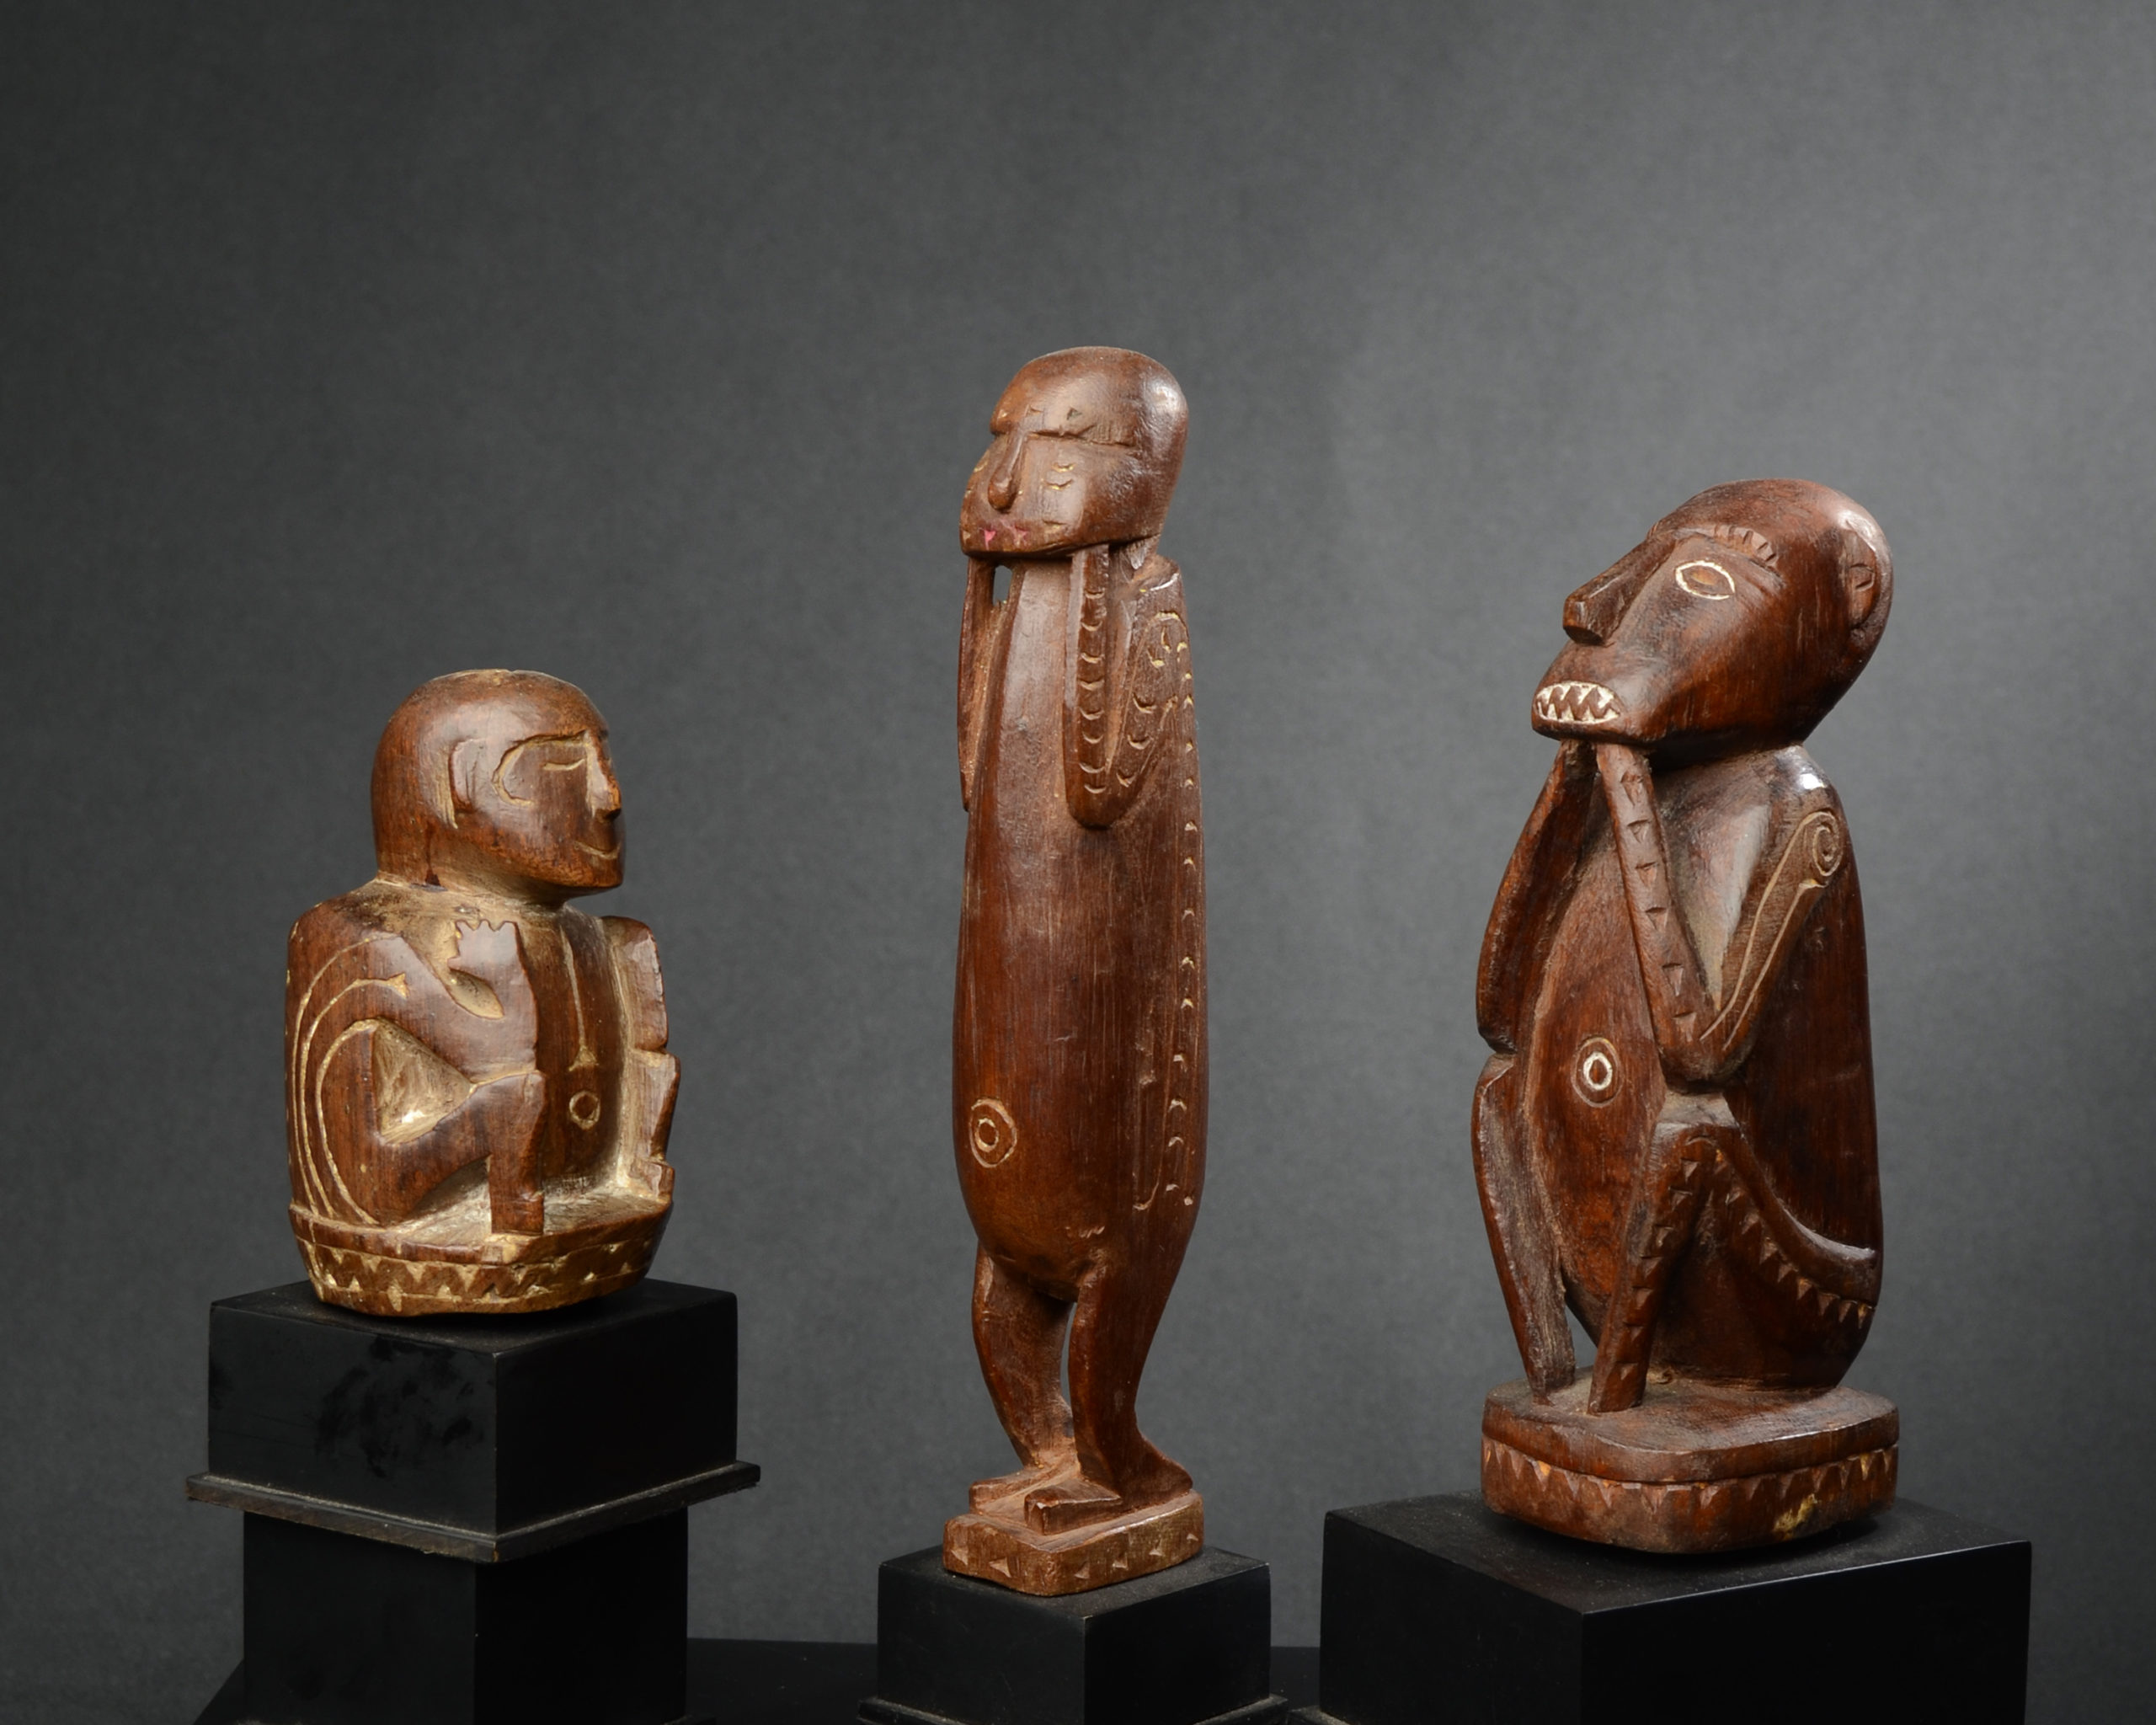 Three Fine Old Massim Ancestor Figures, Milne Bay Province, PNG Early 20th Century